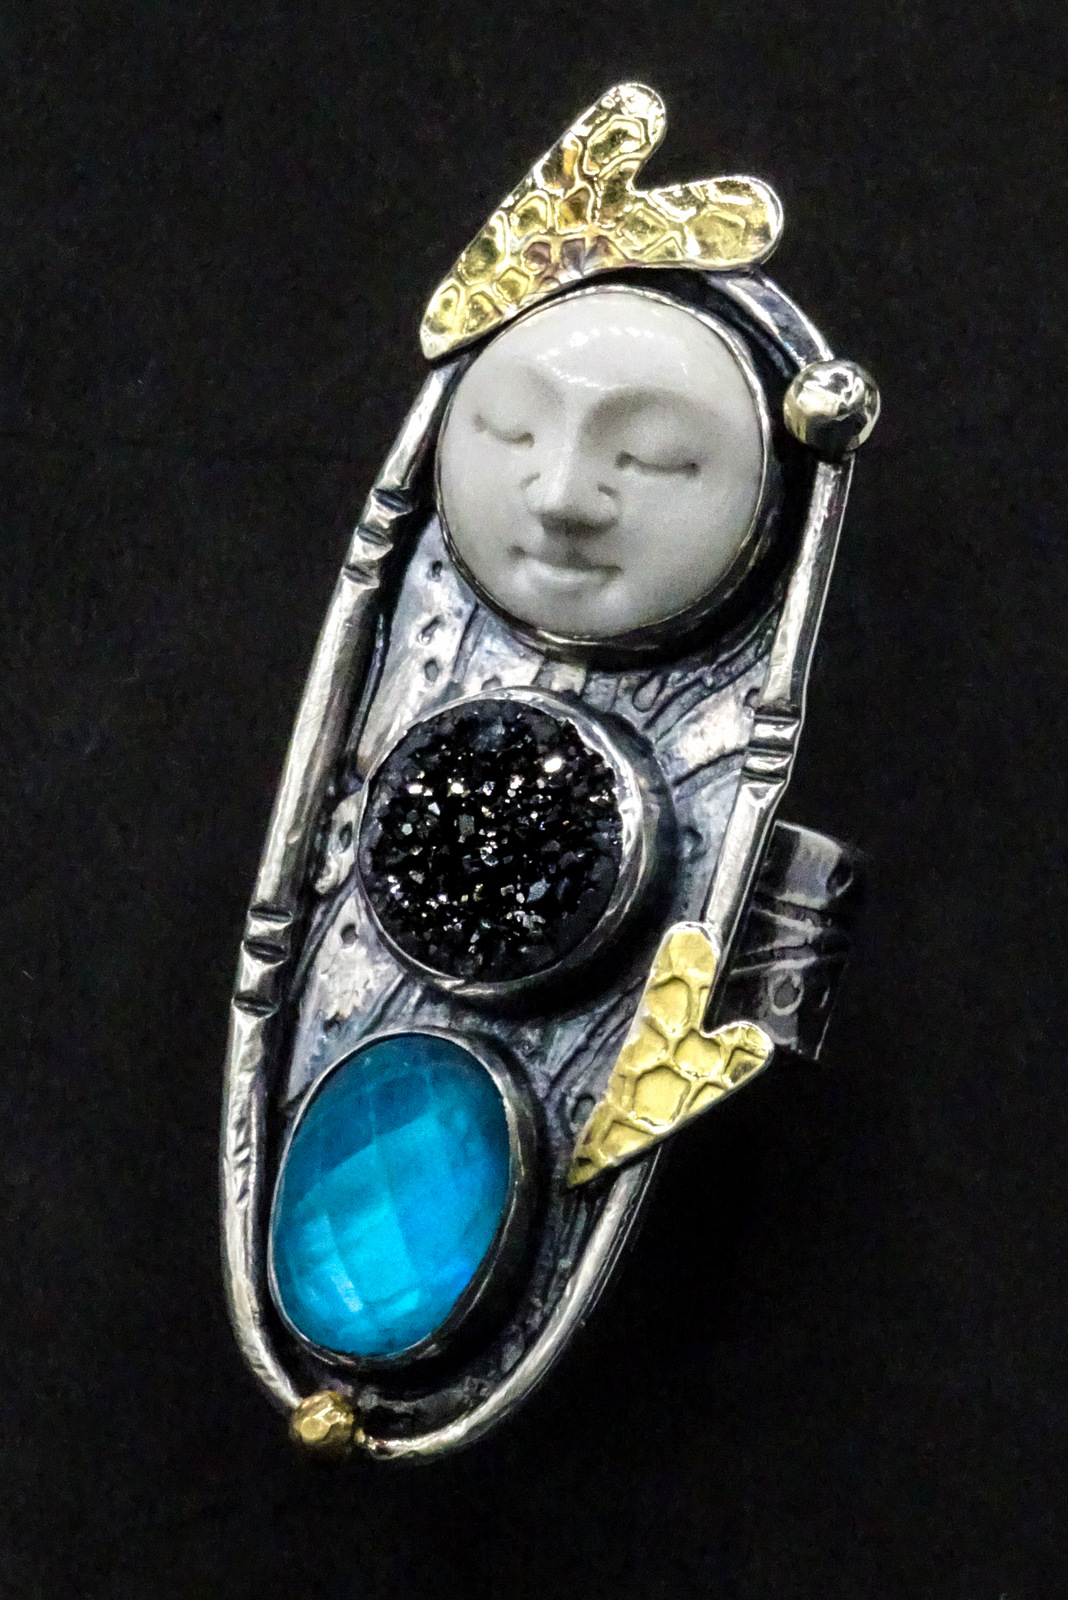 02-Sylvia McCollum, Handcrafted Faces of Courage, Fine Art Silver Jewelry-002.JPG